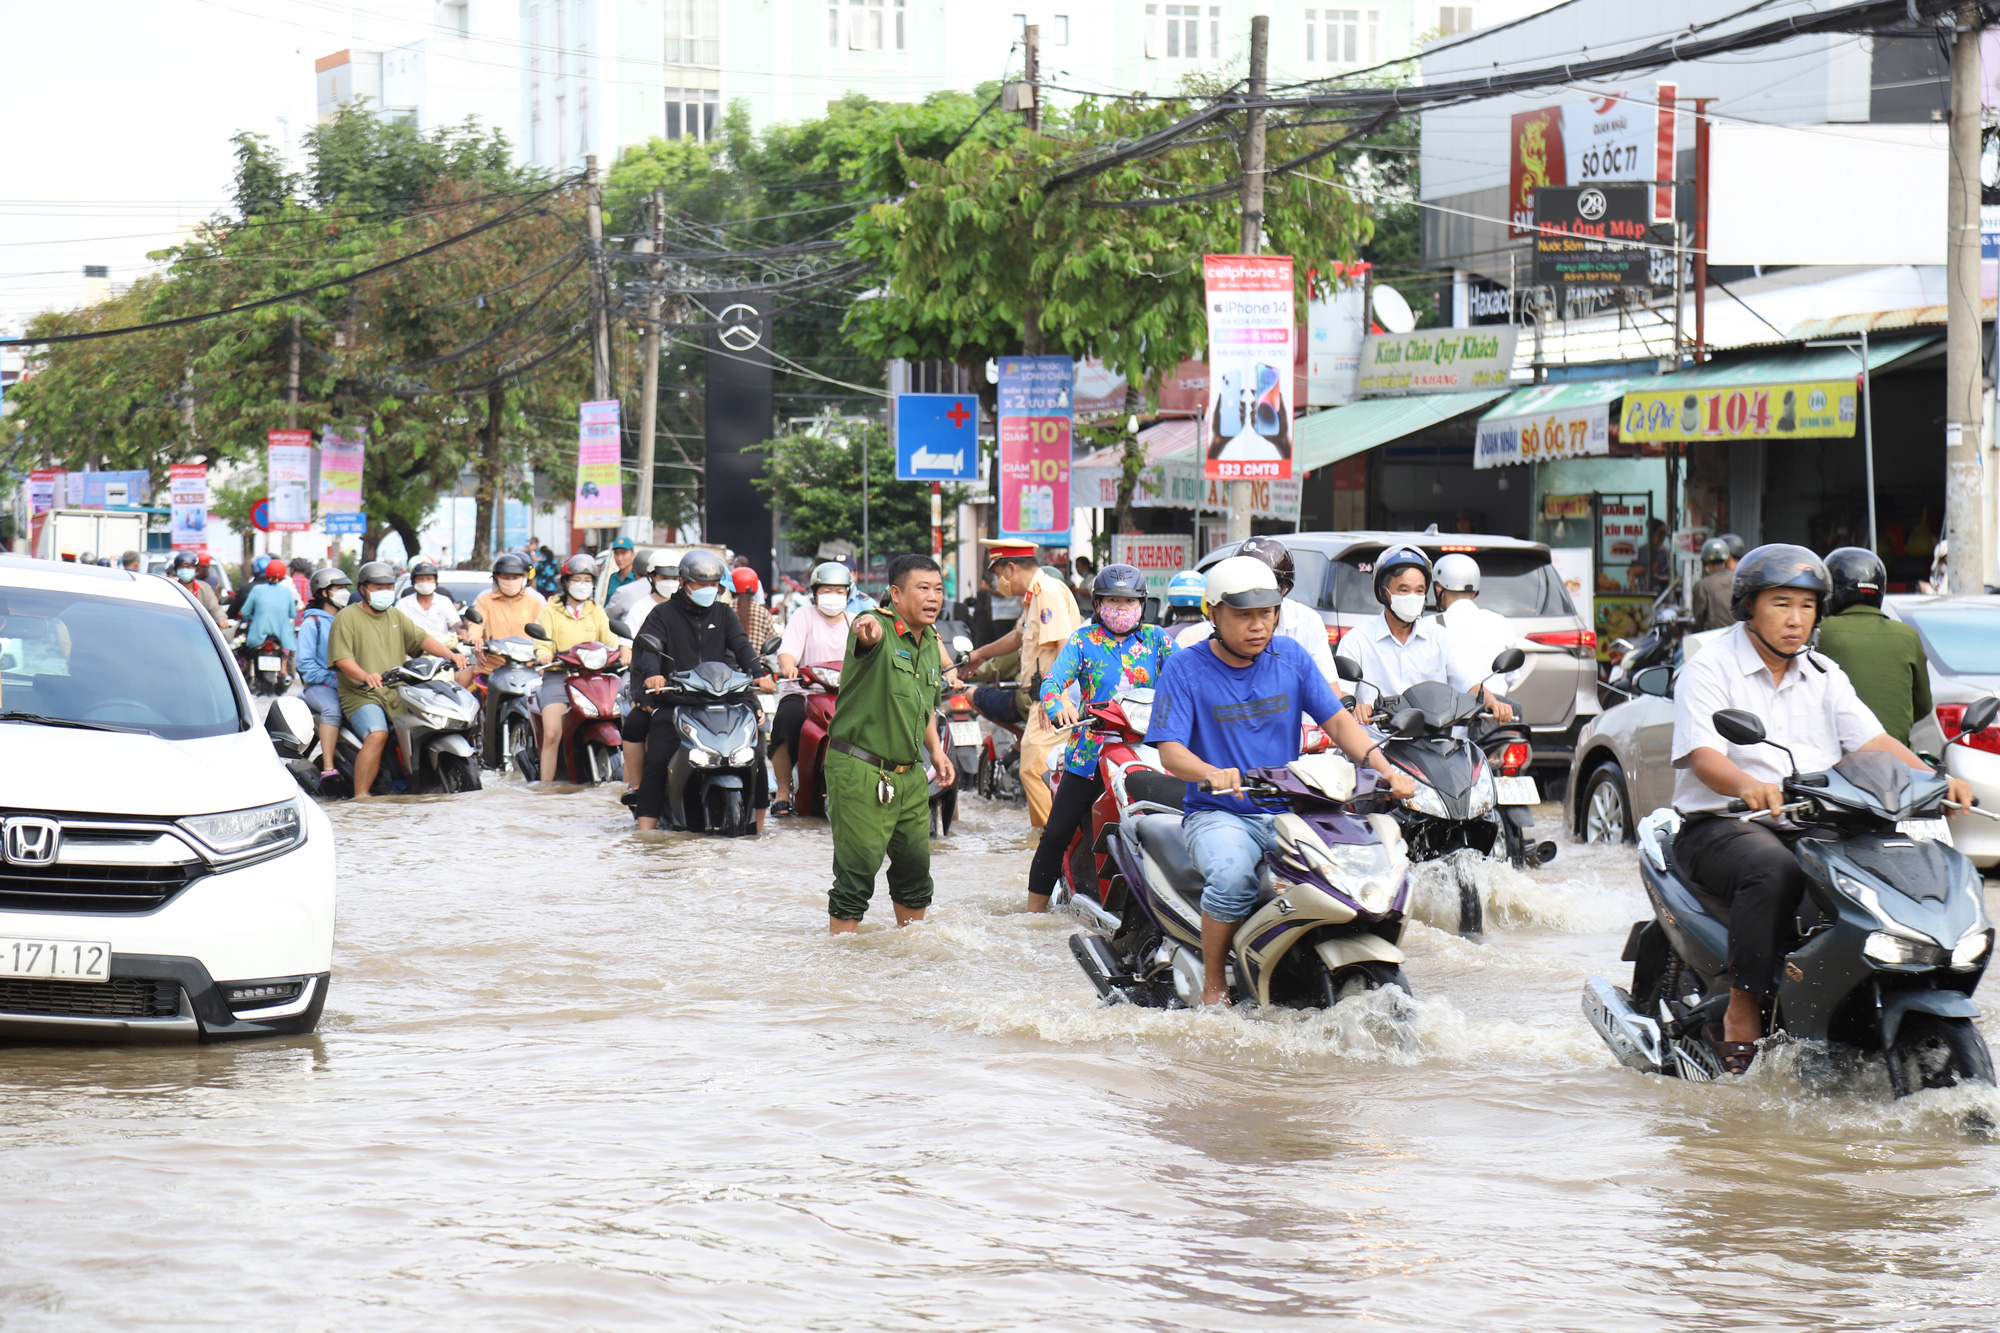 In Vietnam, proposal quotes $341mn to expand 7km road section